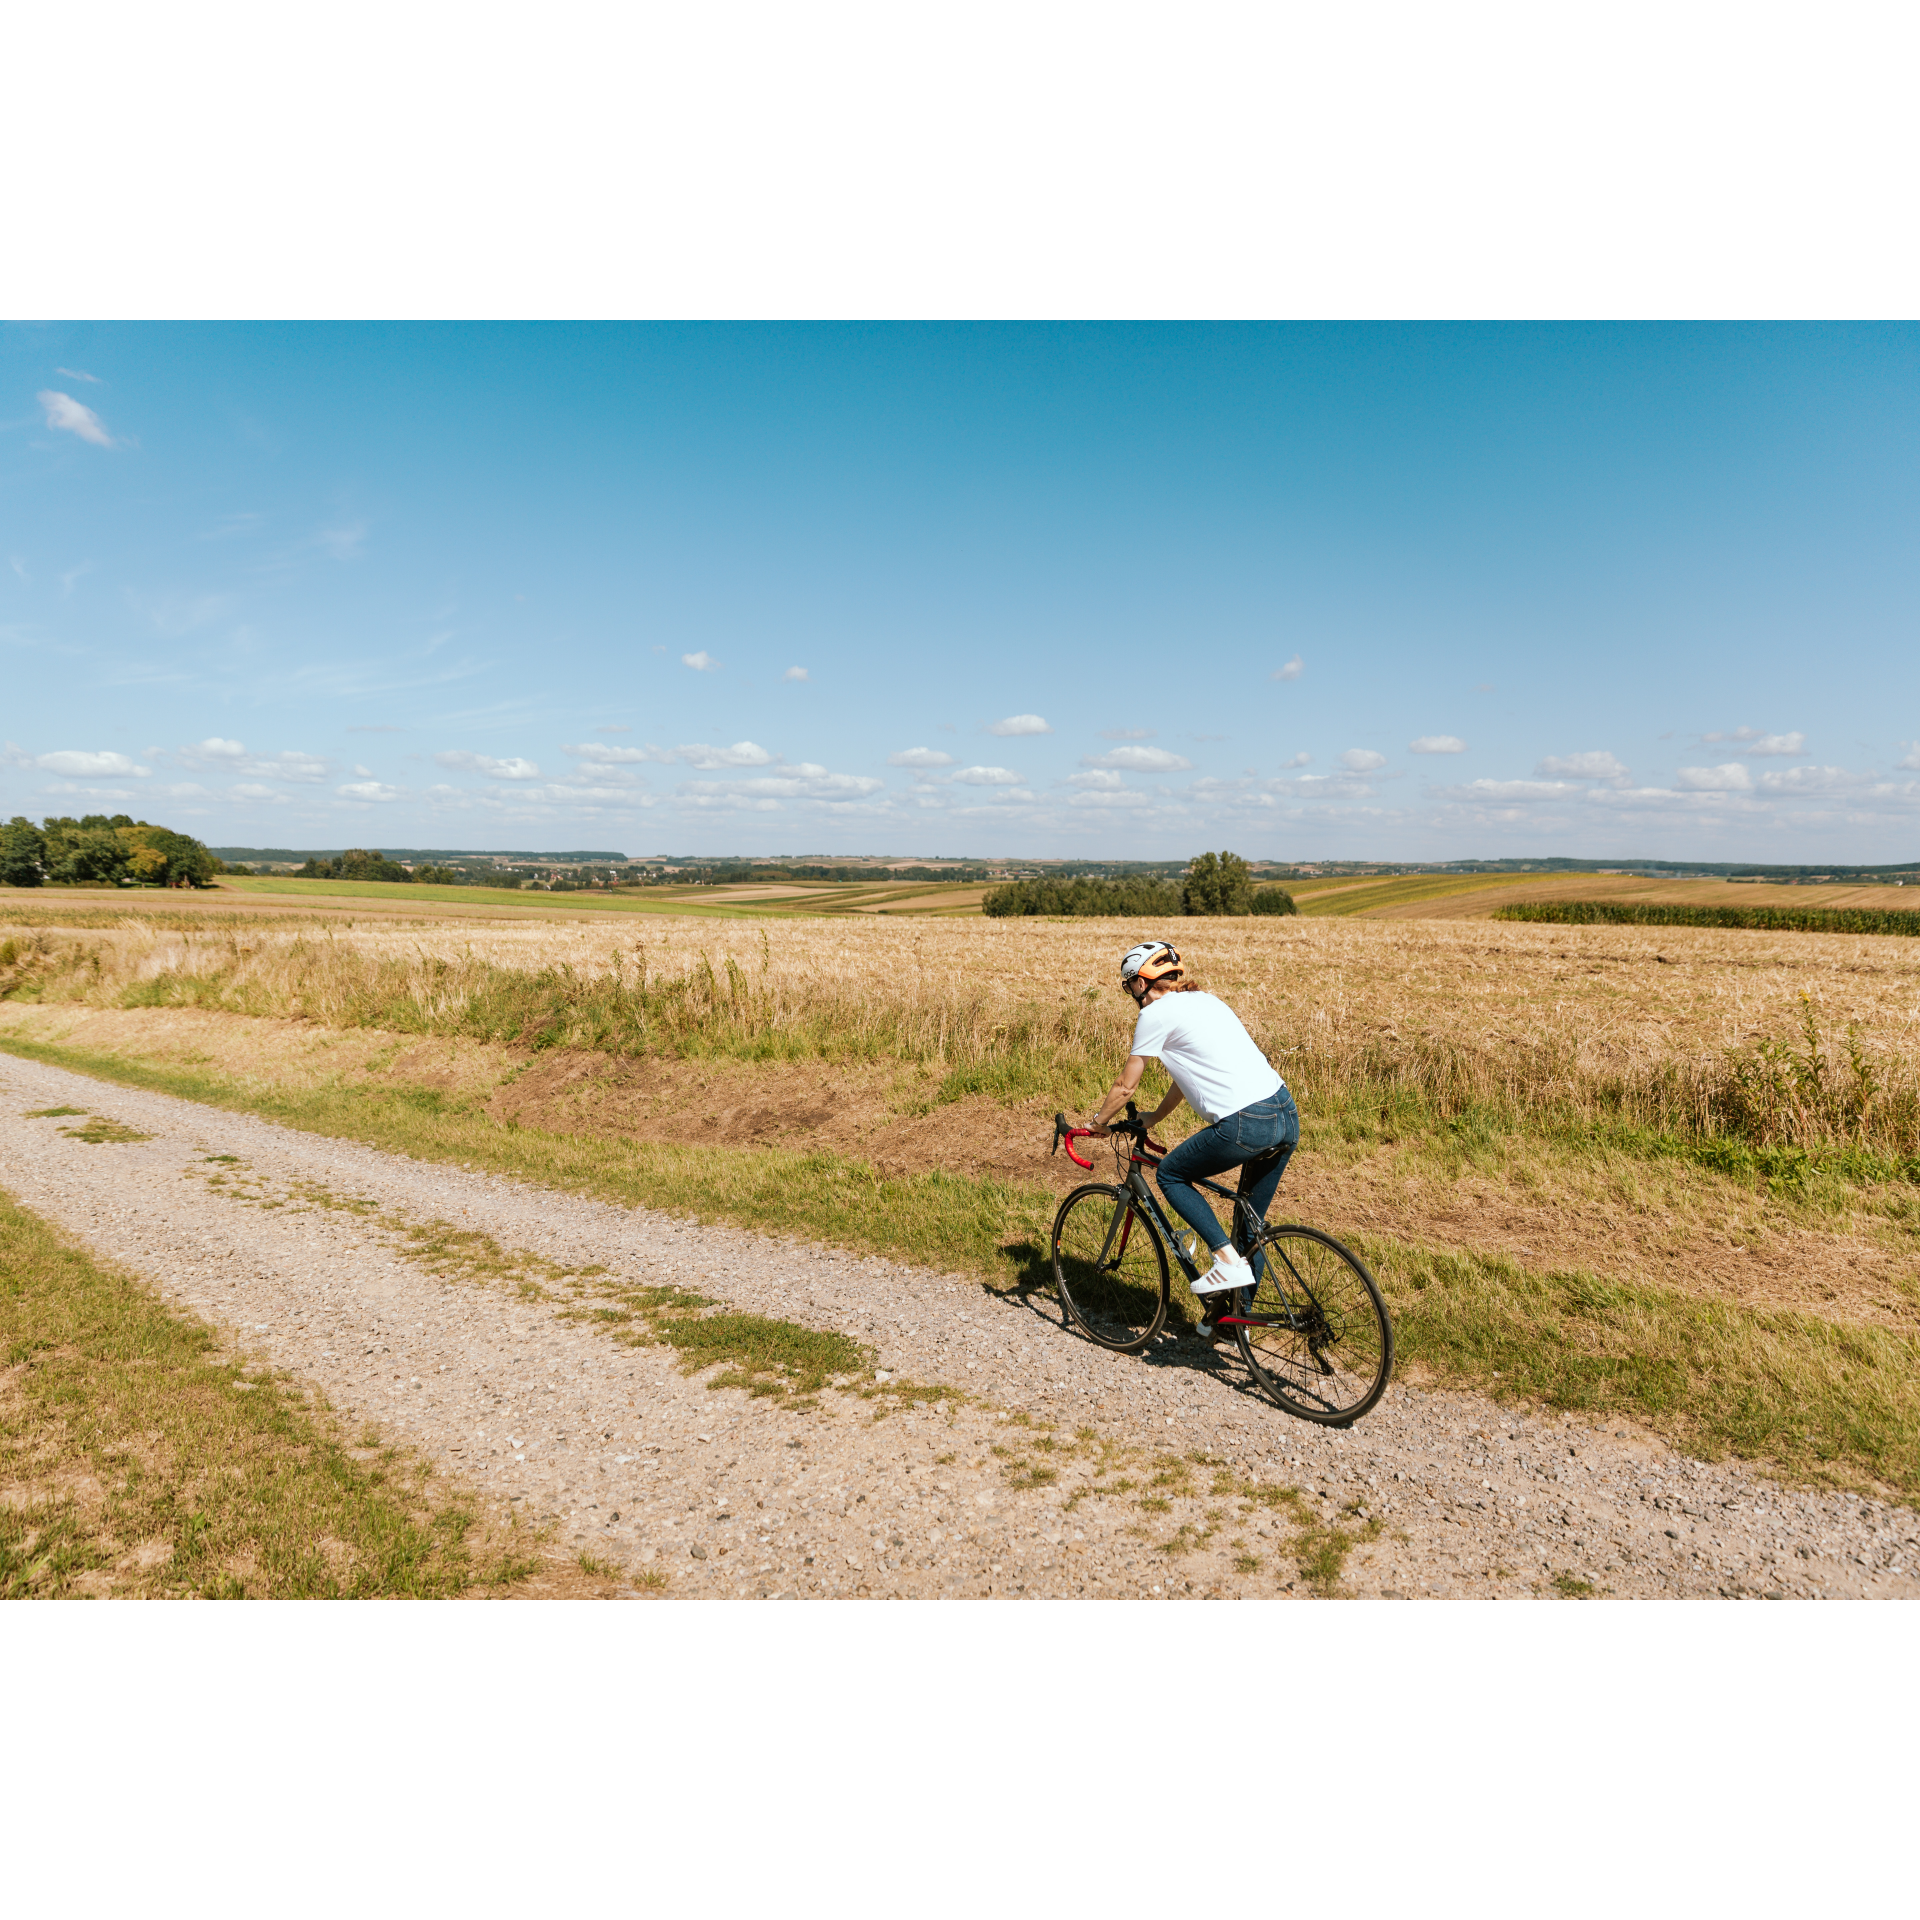 A cyclist on a dirt road